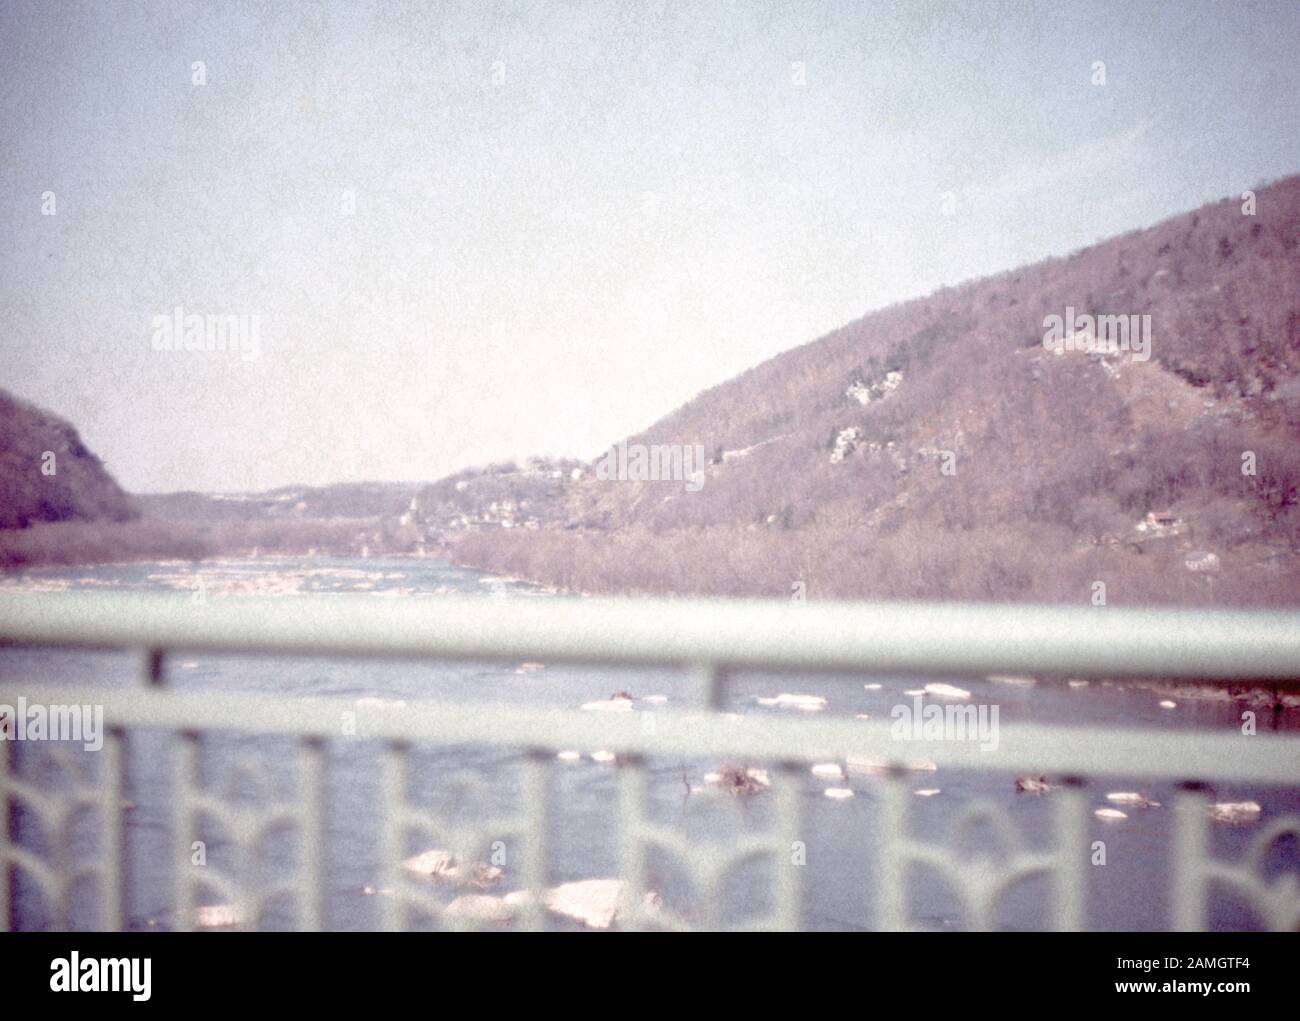 Vernacular photograph taken on a 35mm analog film transparency, believed to depict white metal fence near body of water during daytime, 1965. Major topics/objects detected include Sky, Mountain, Nature and Gray Color. () Stock Photo